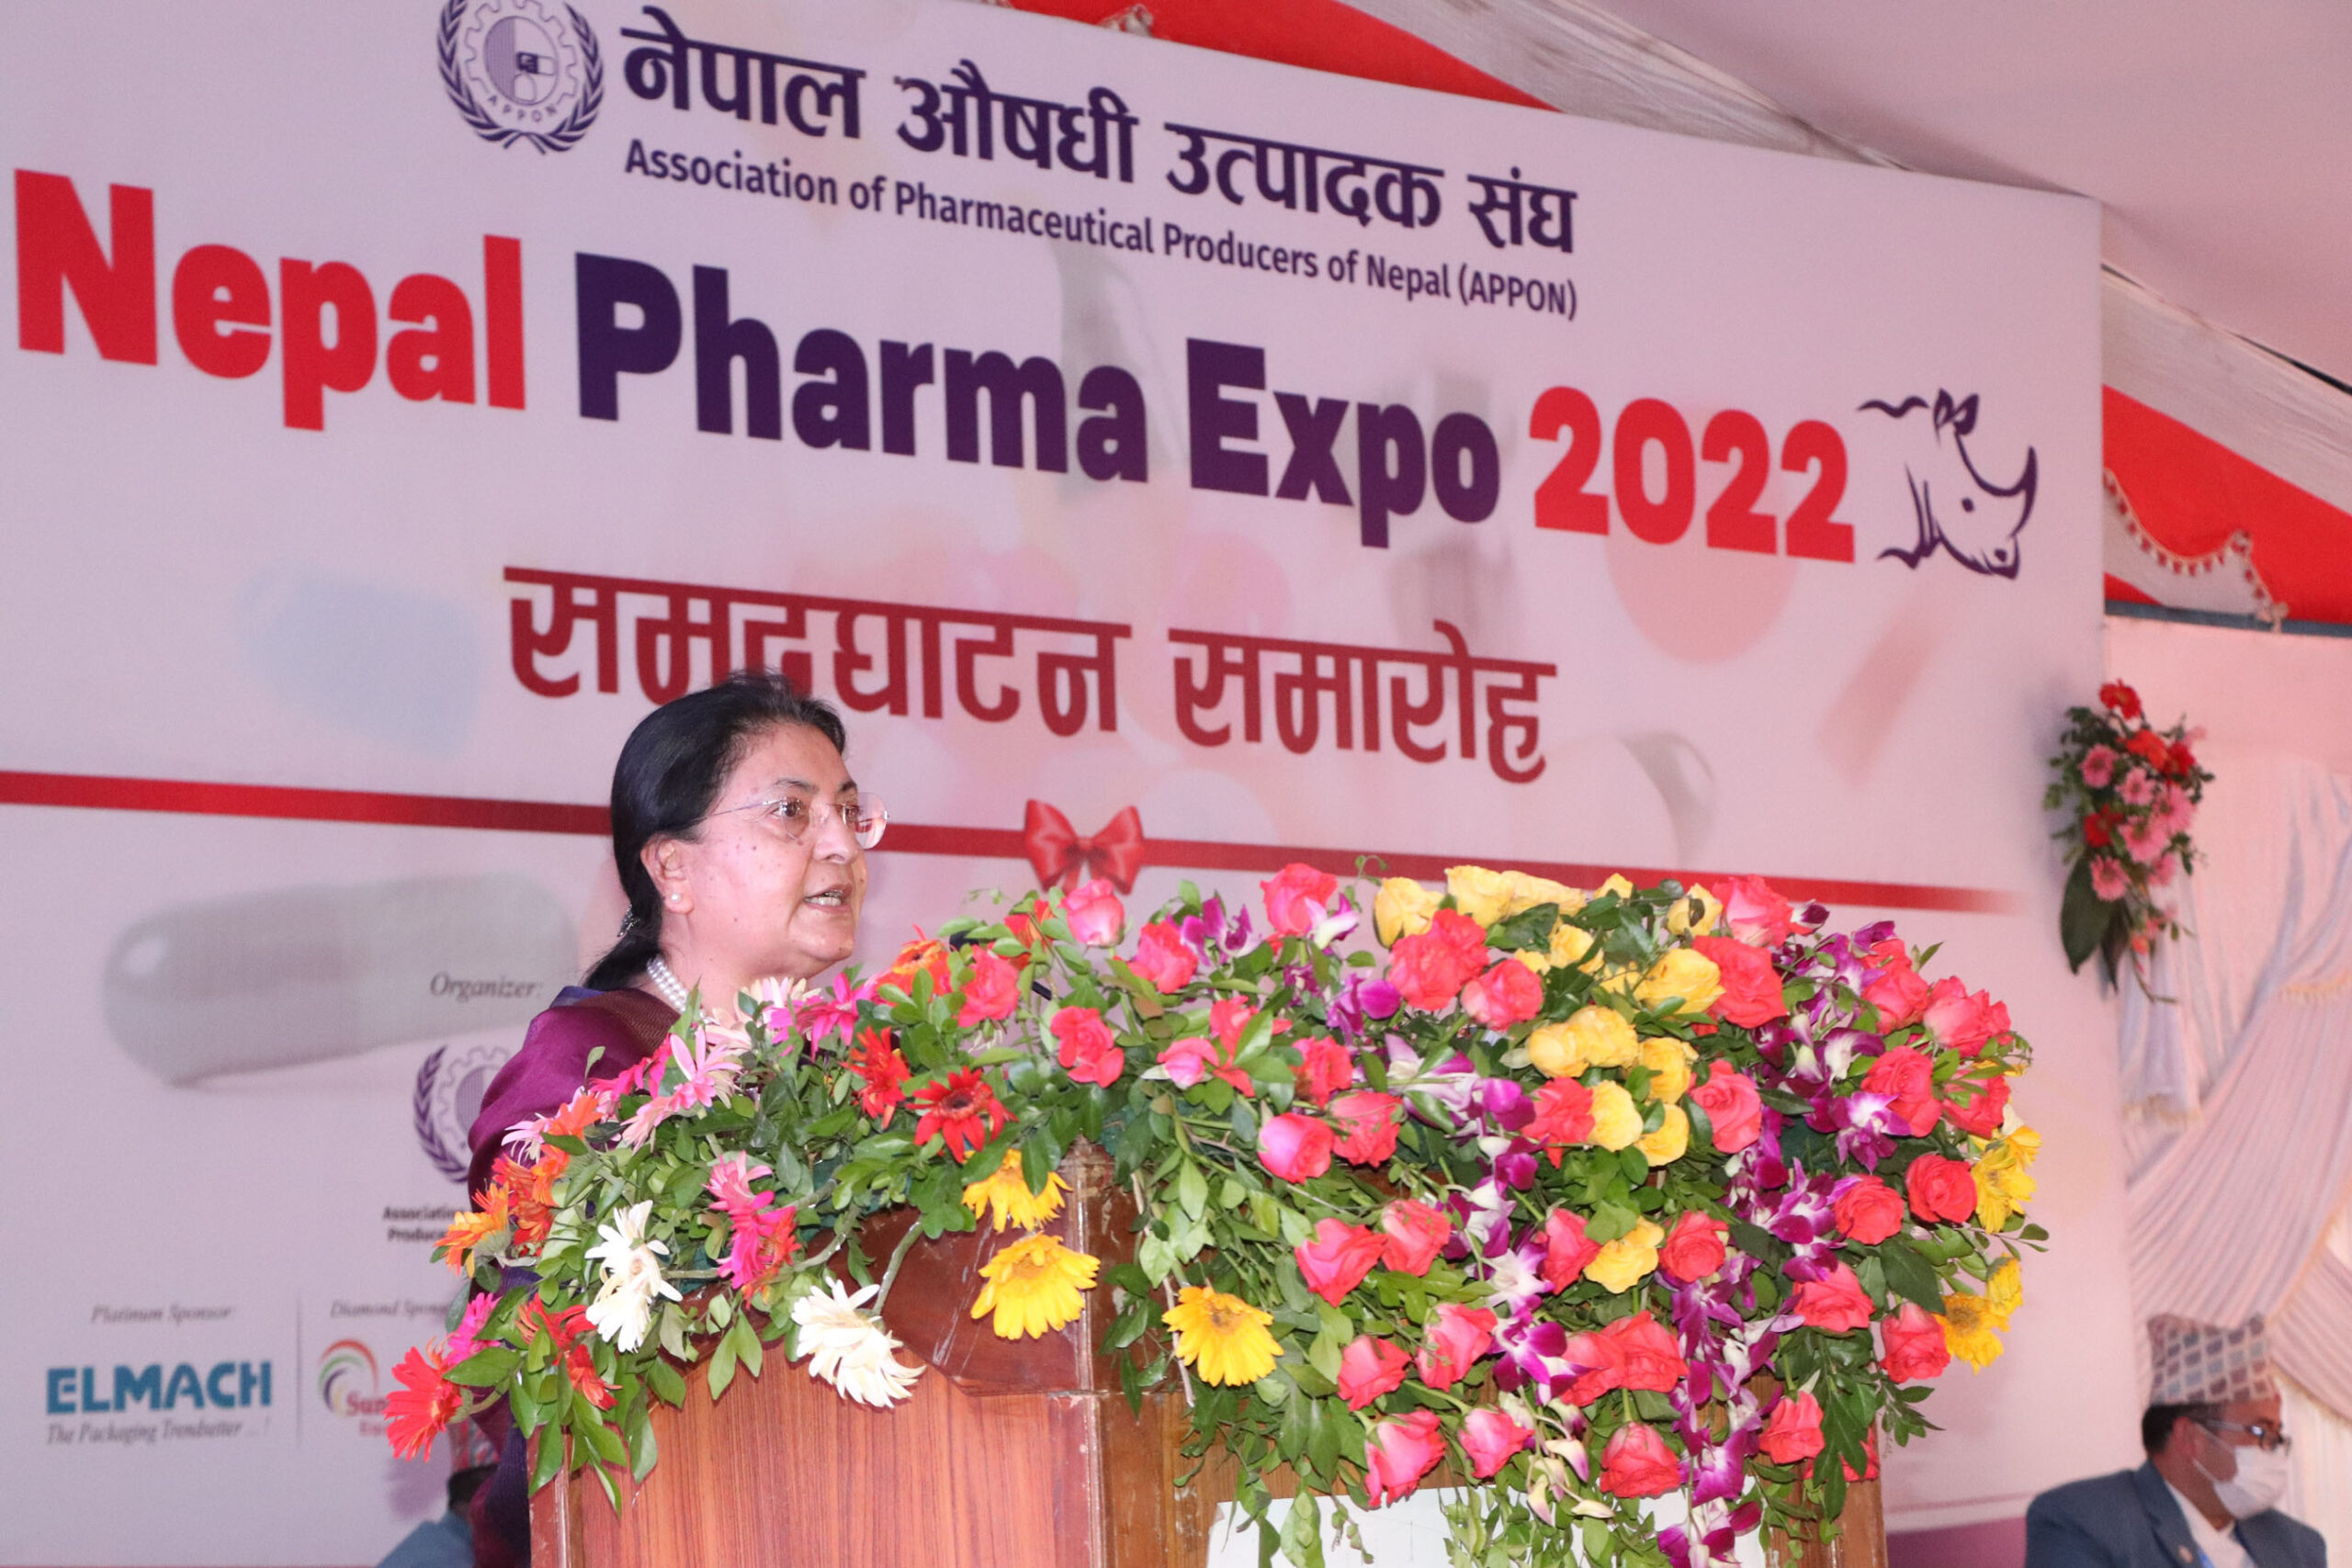 Nepal could become self-sufficient in medicine production